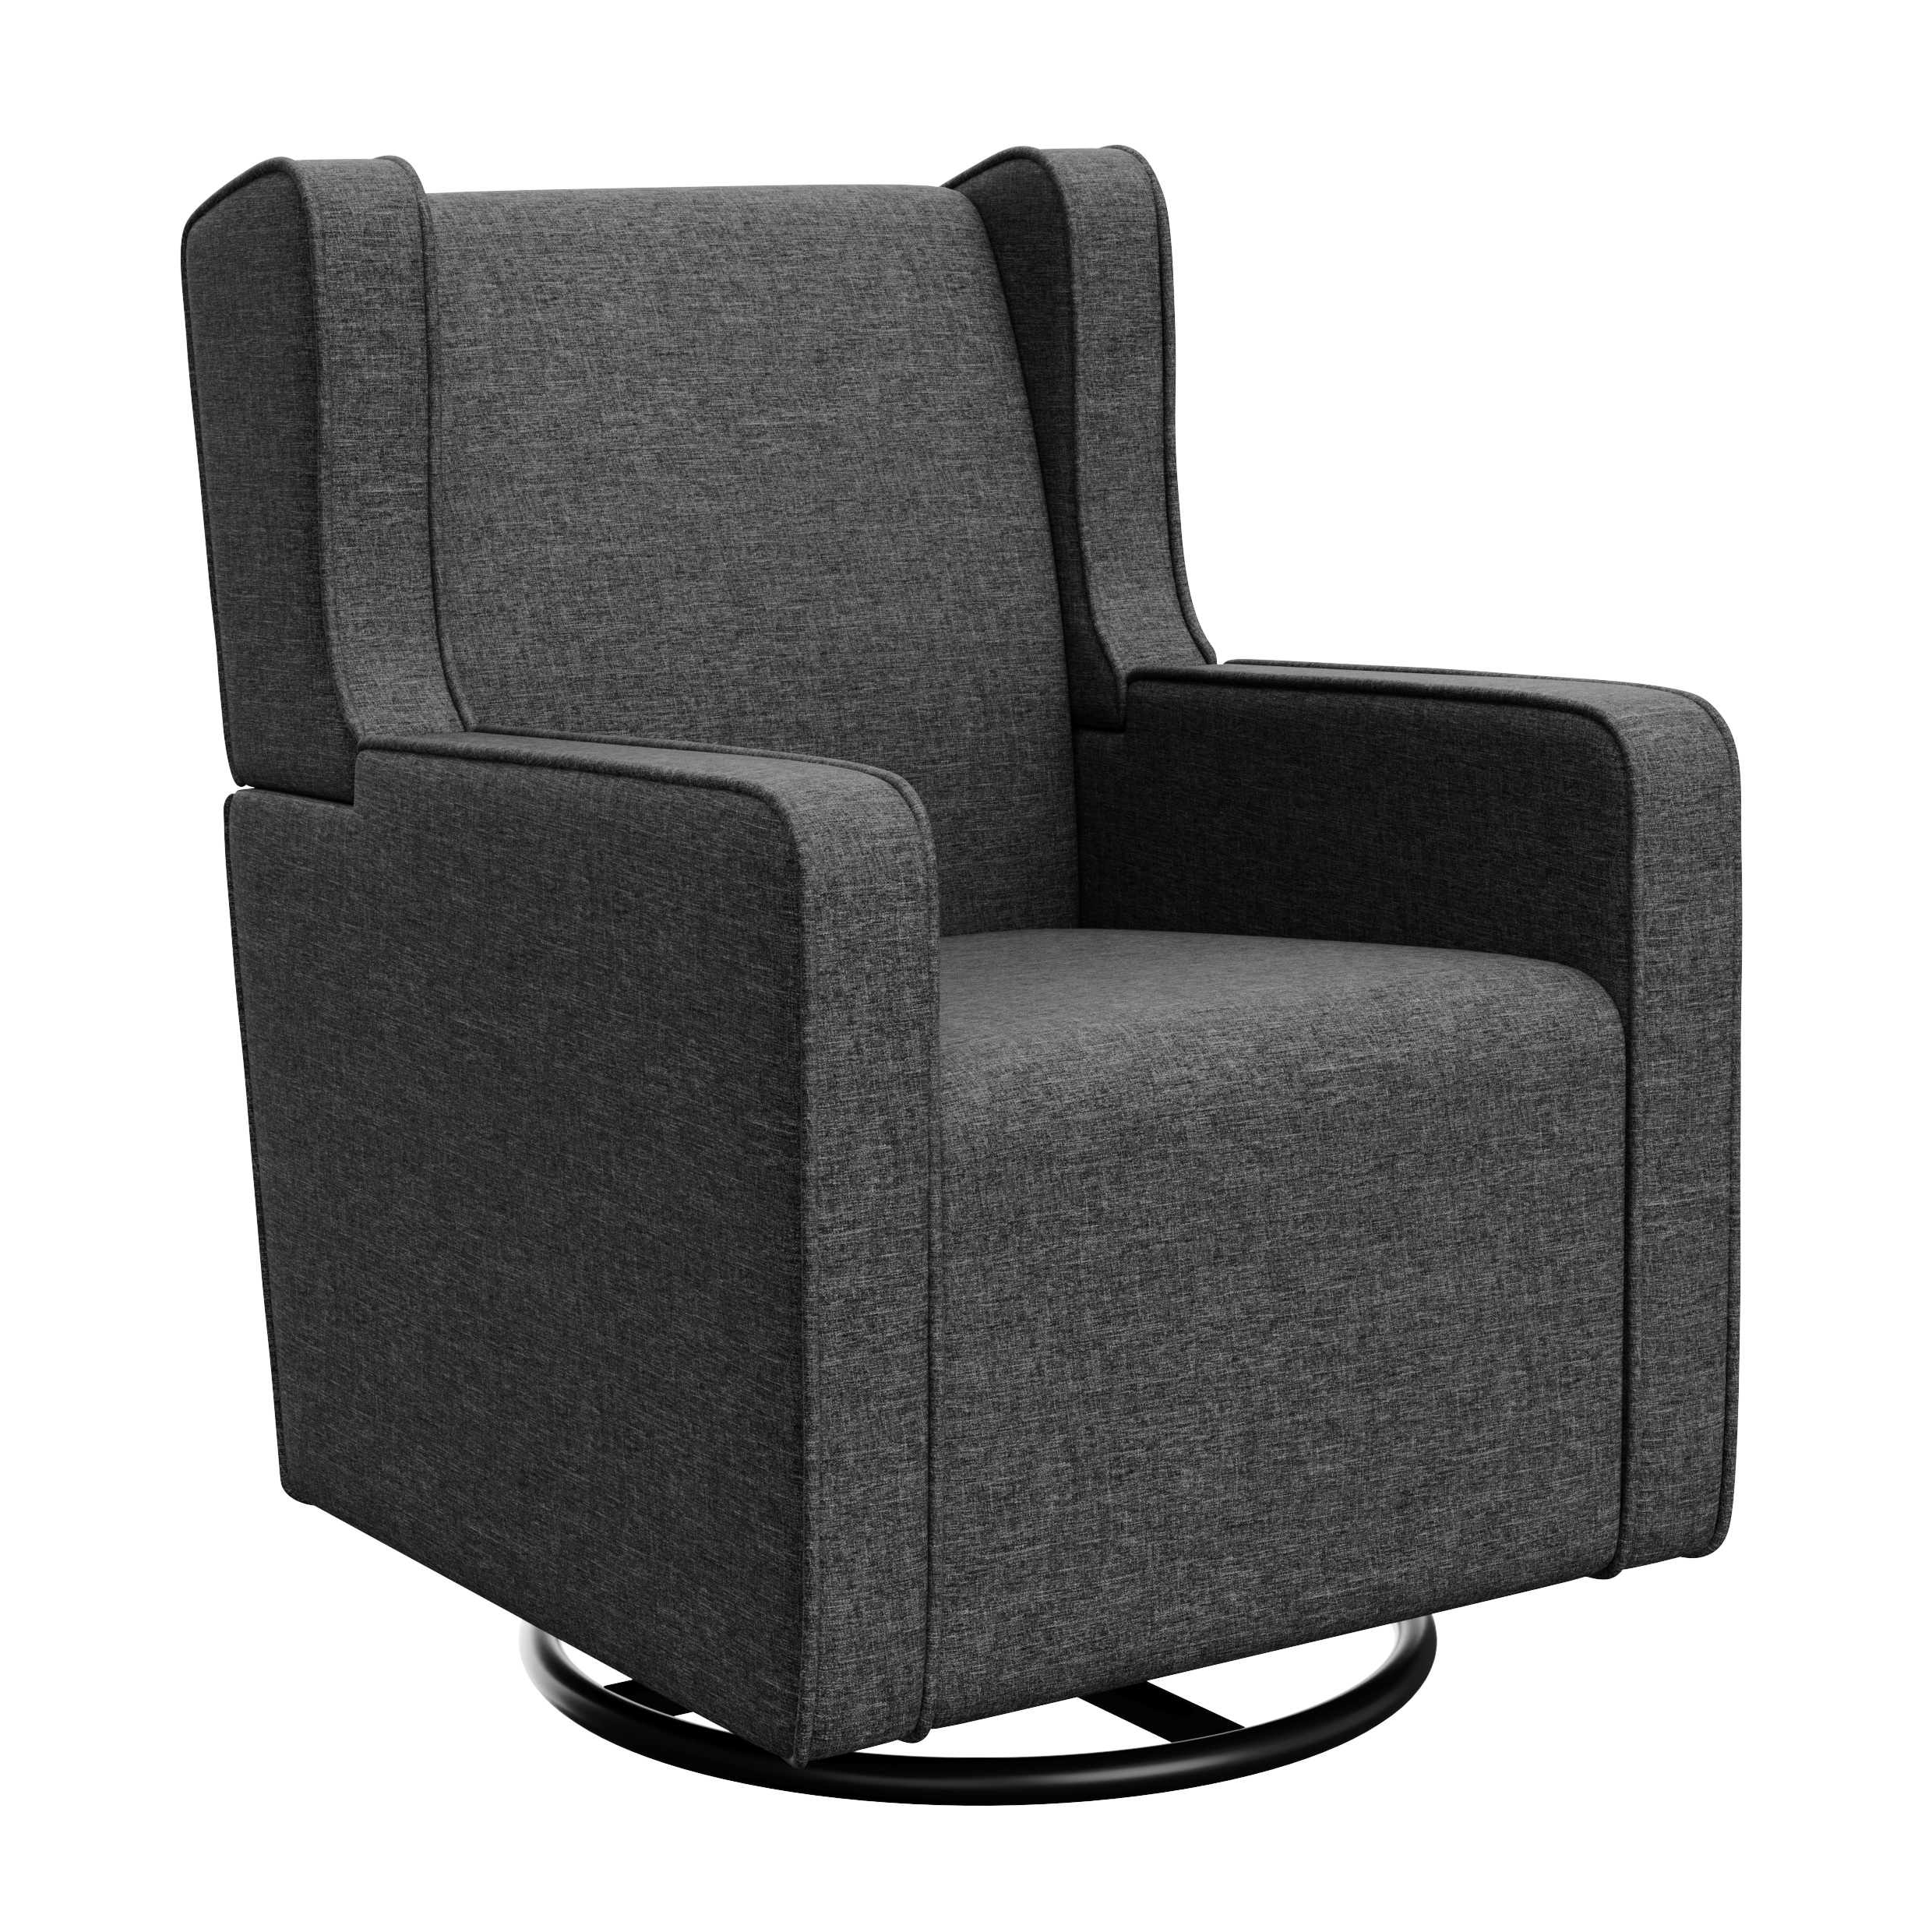 Graco Remi Upholstered Swivel Glider Night Sky - image 1 of 6